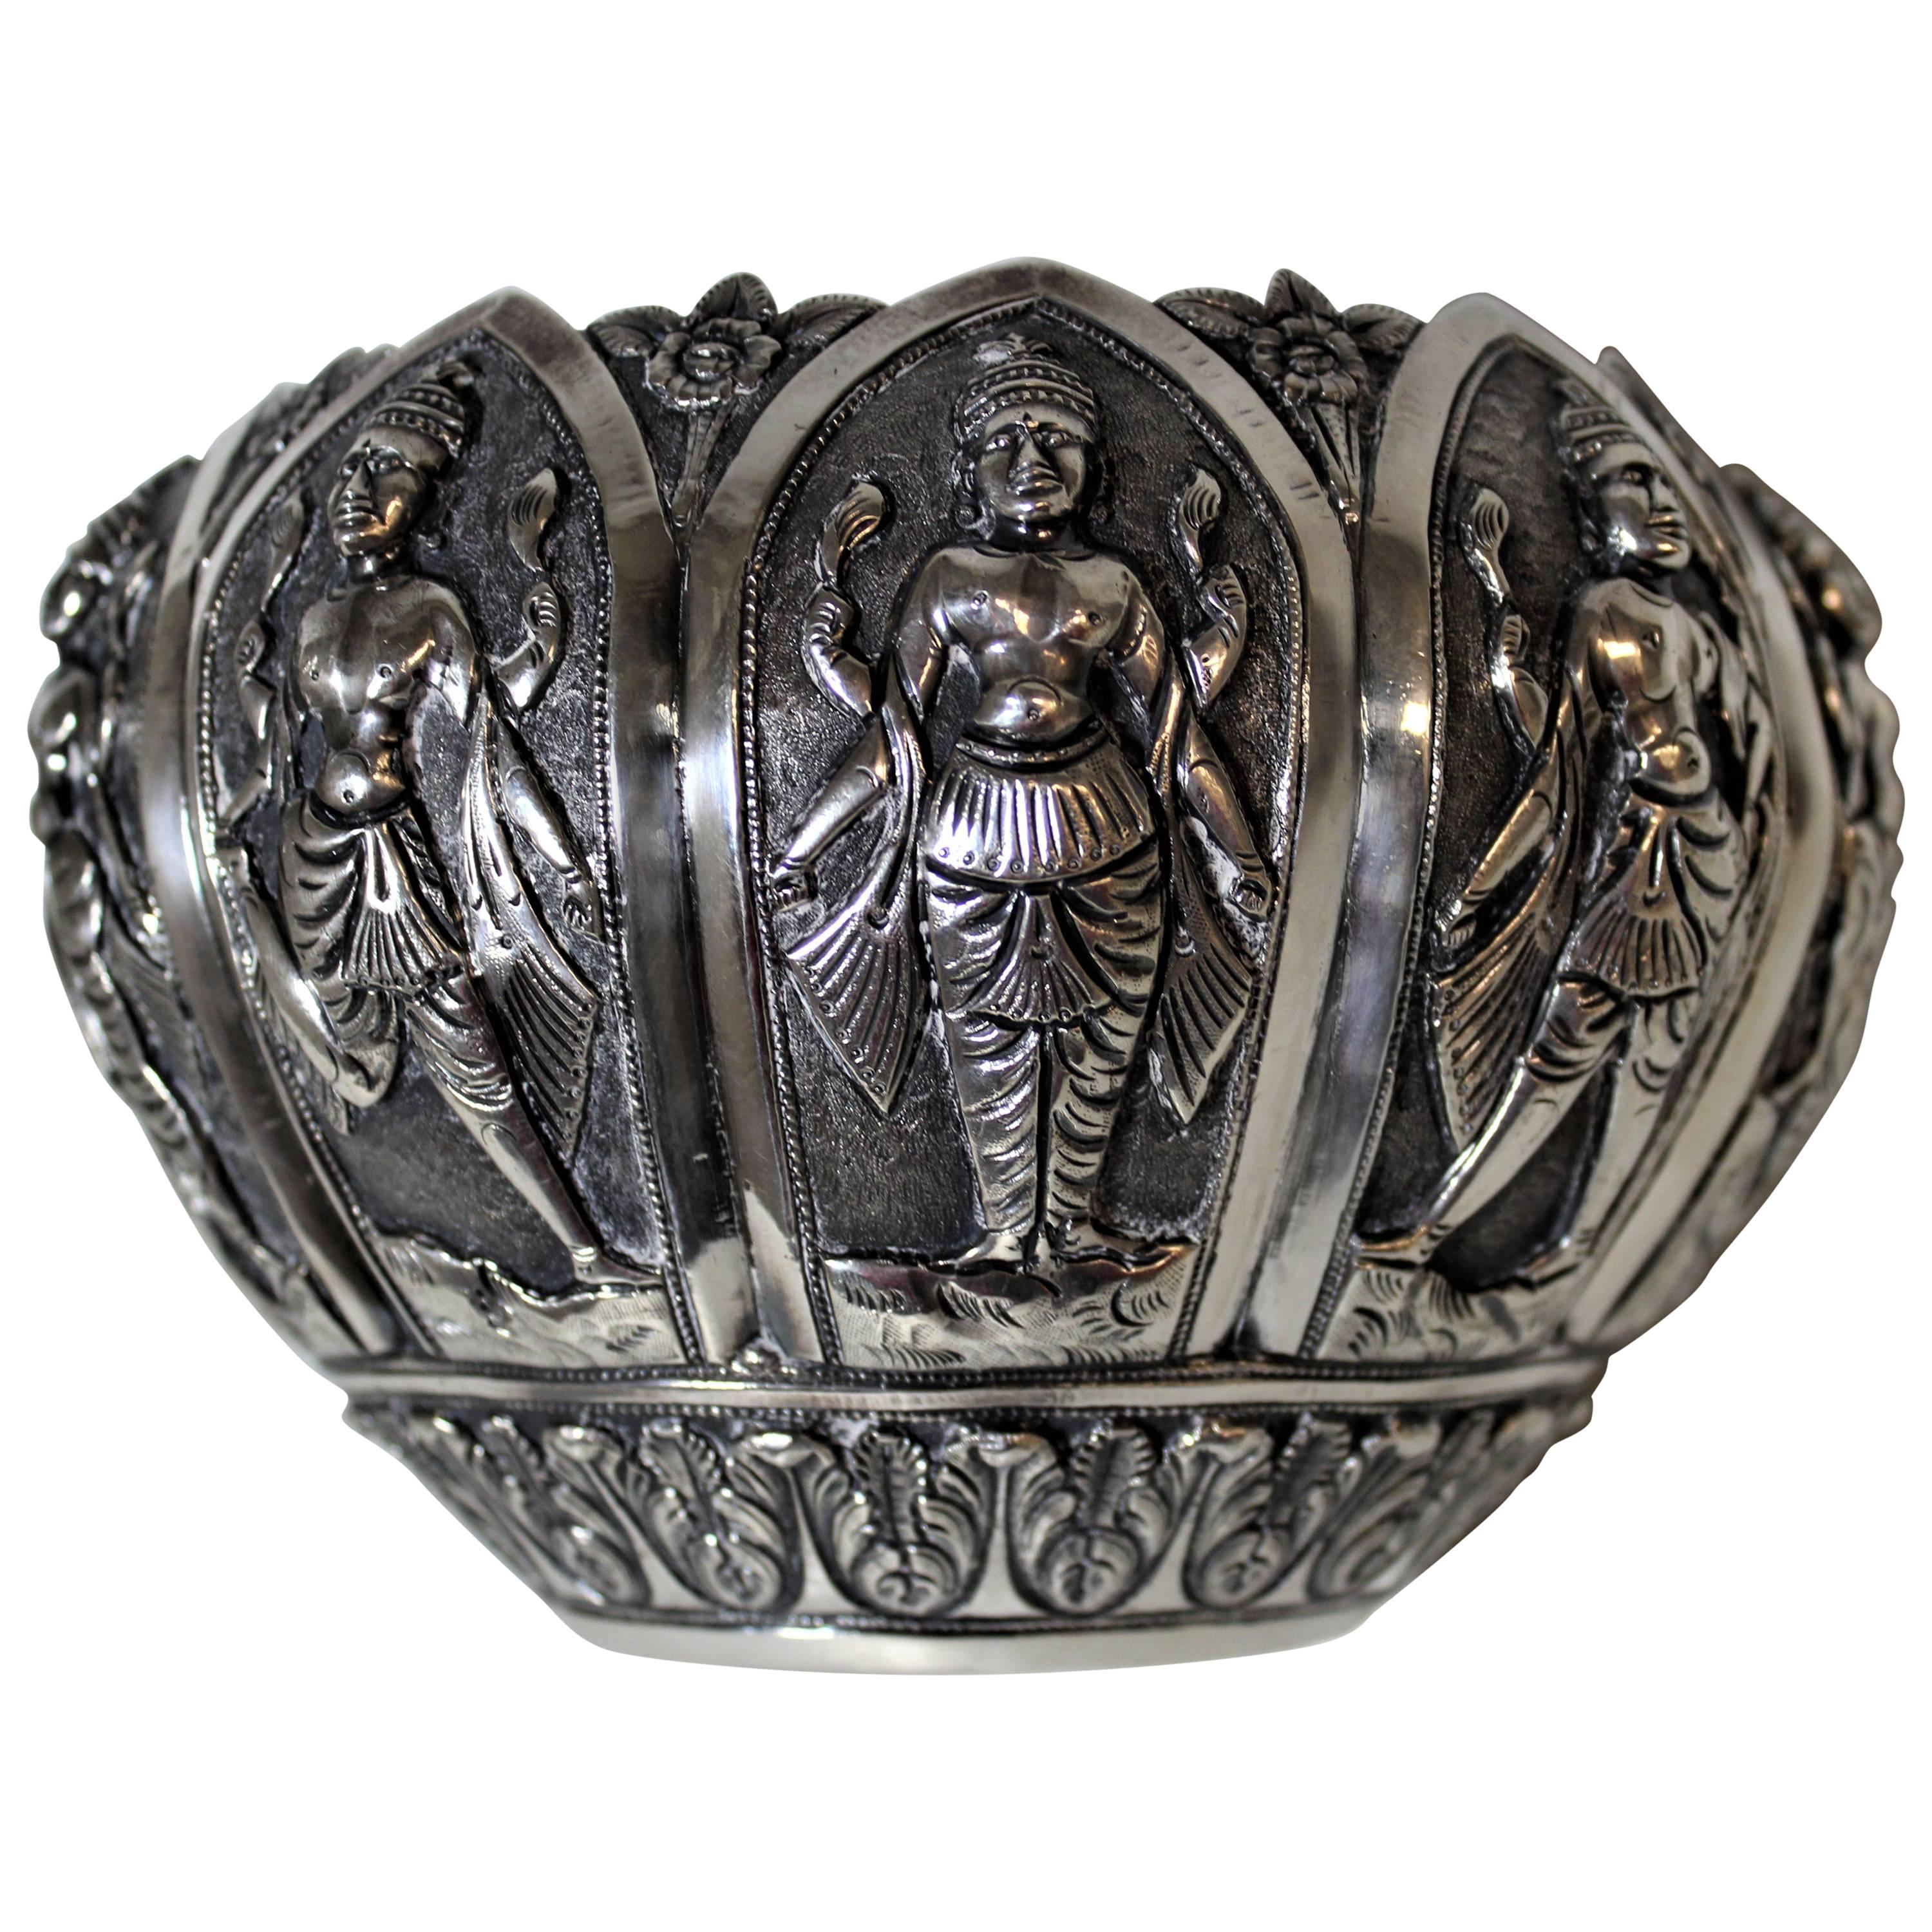 Silver Anglo-Indian Bowl with Figures